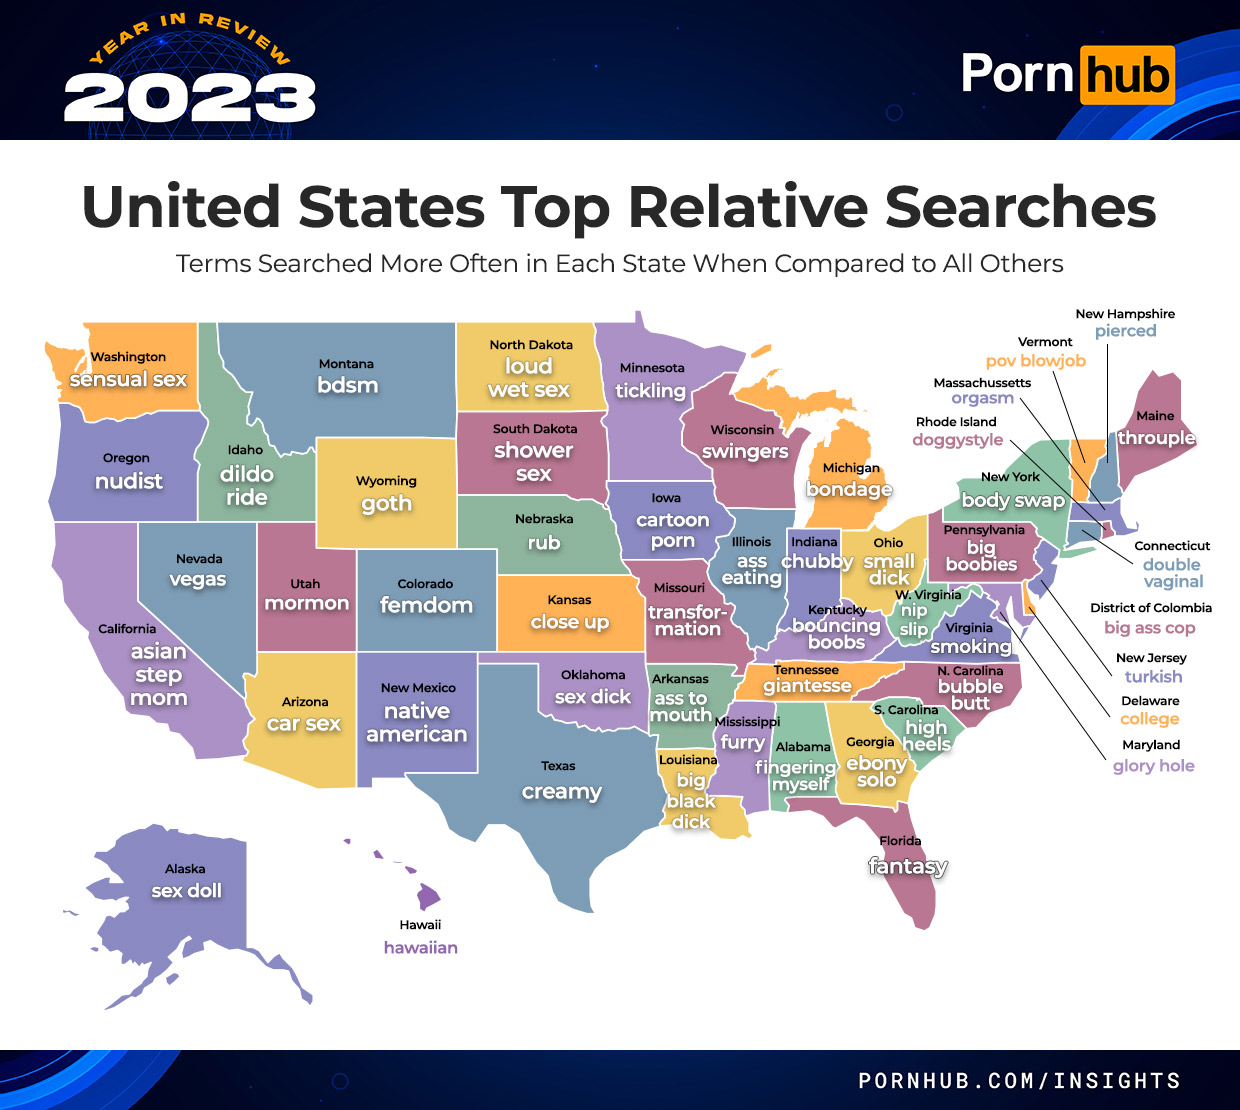 pornhub-insights-2023-year-in-review-united-states-relative-searches-map.jpg